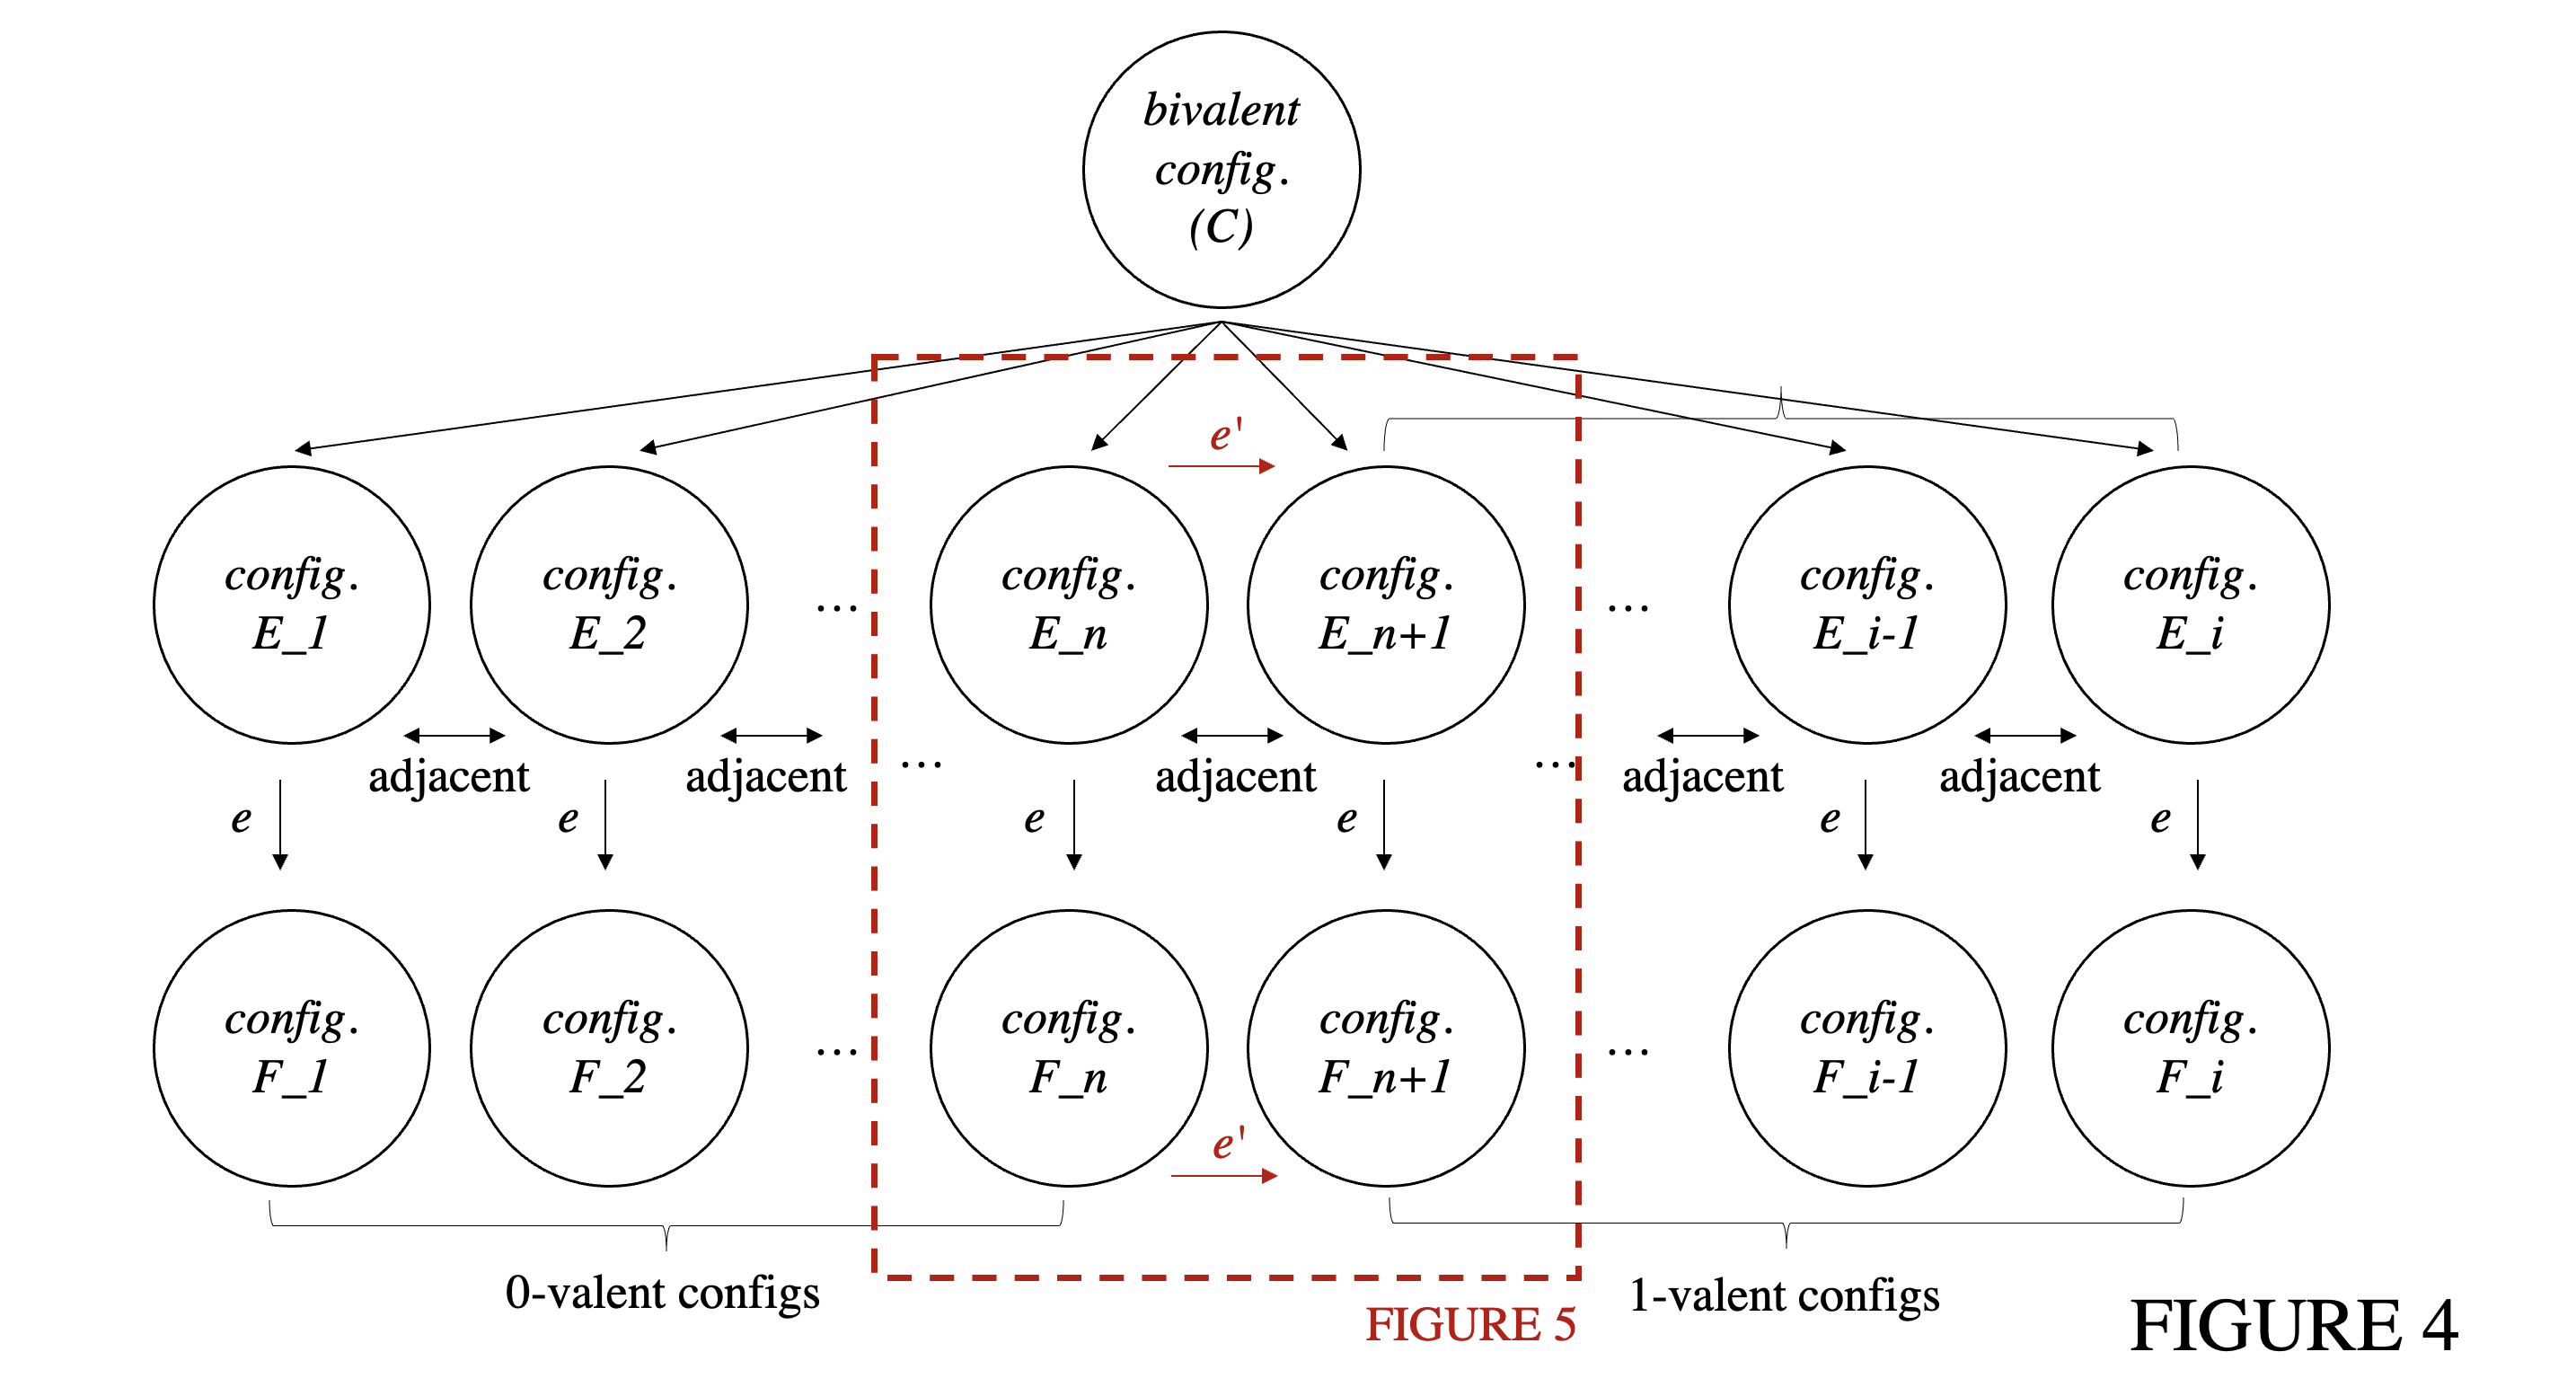 FIGURE 4. Reachable configurations from C.